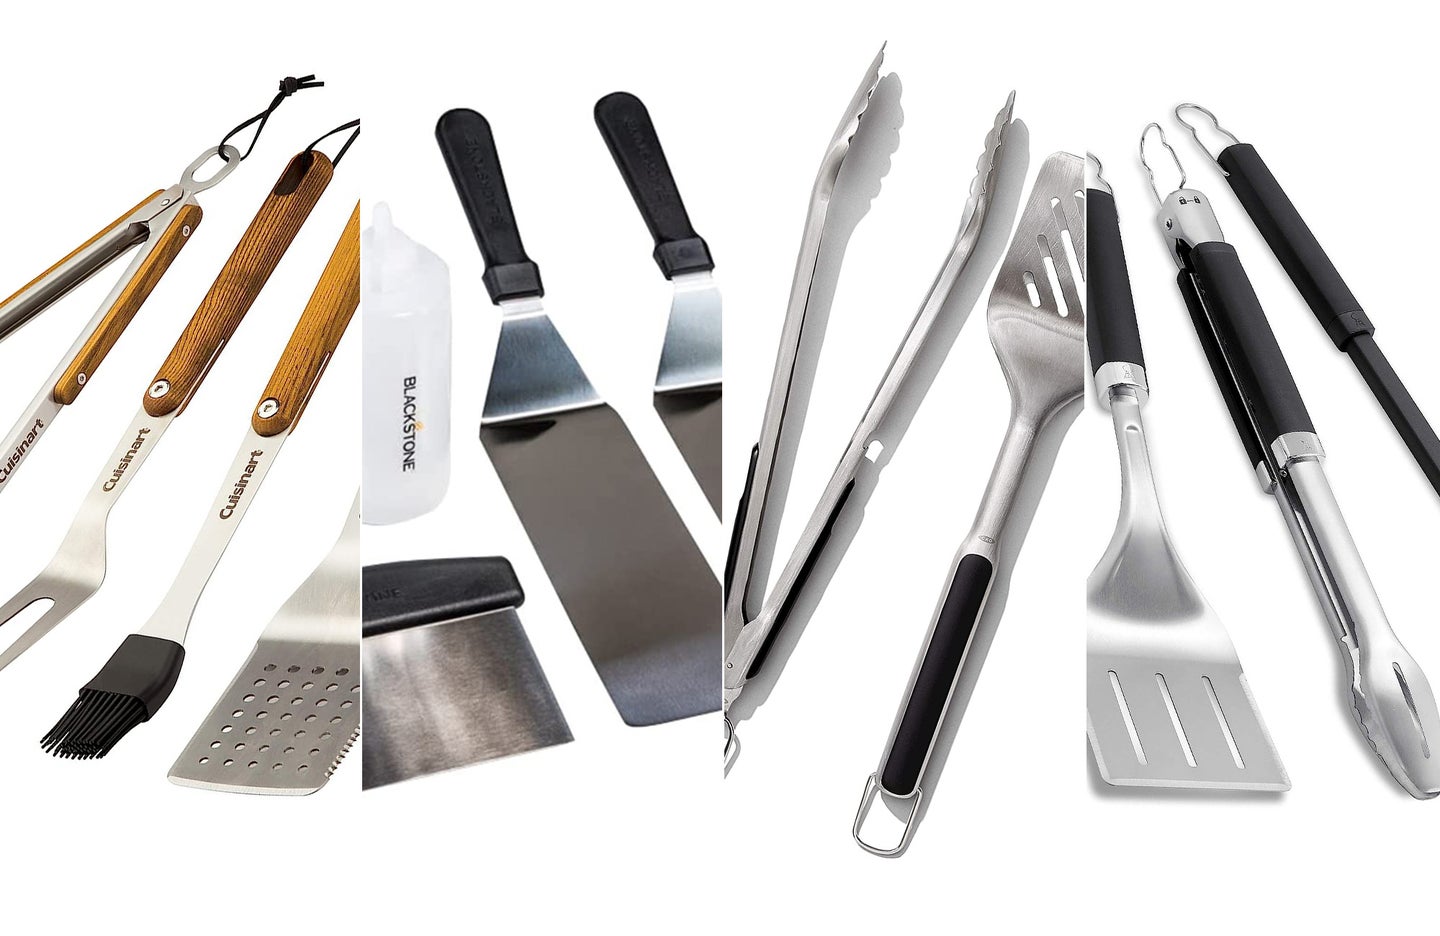 The best grill tool kits composited